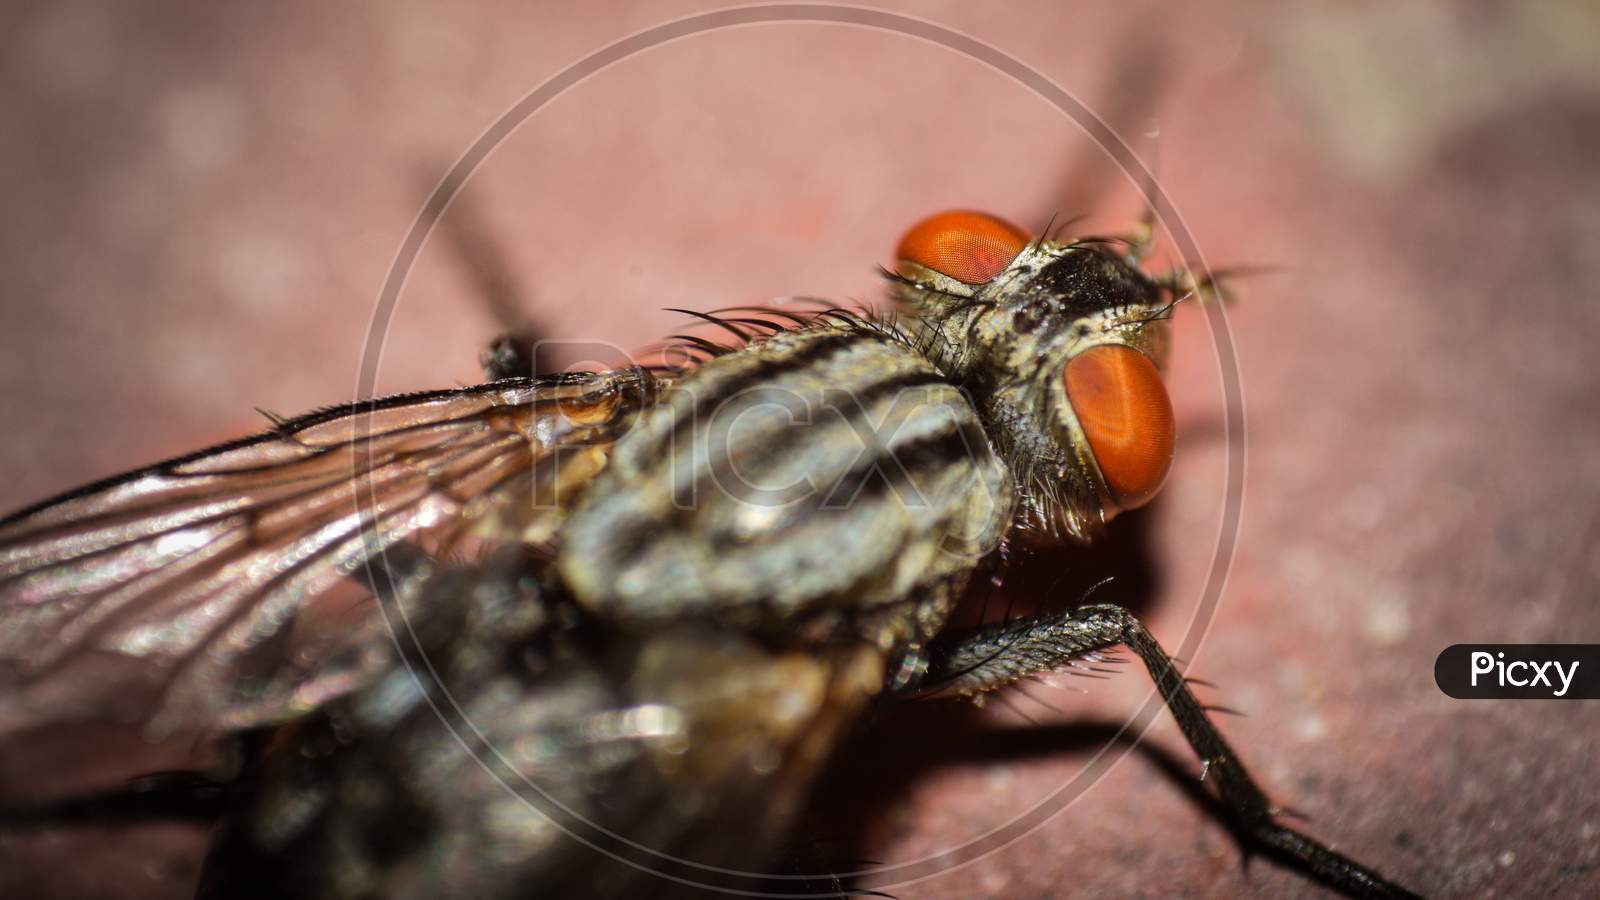 A fly macro photography sitting on a brick